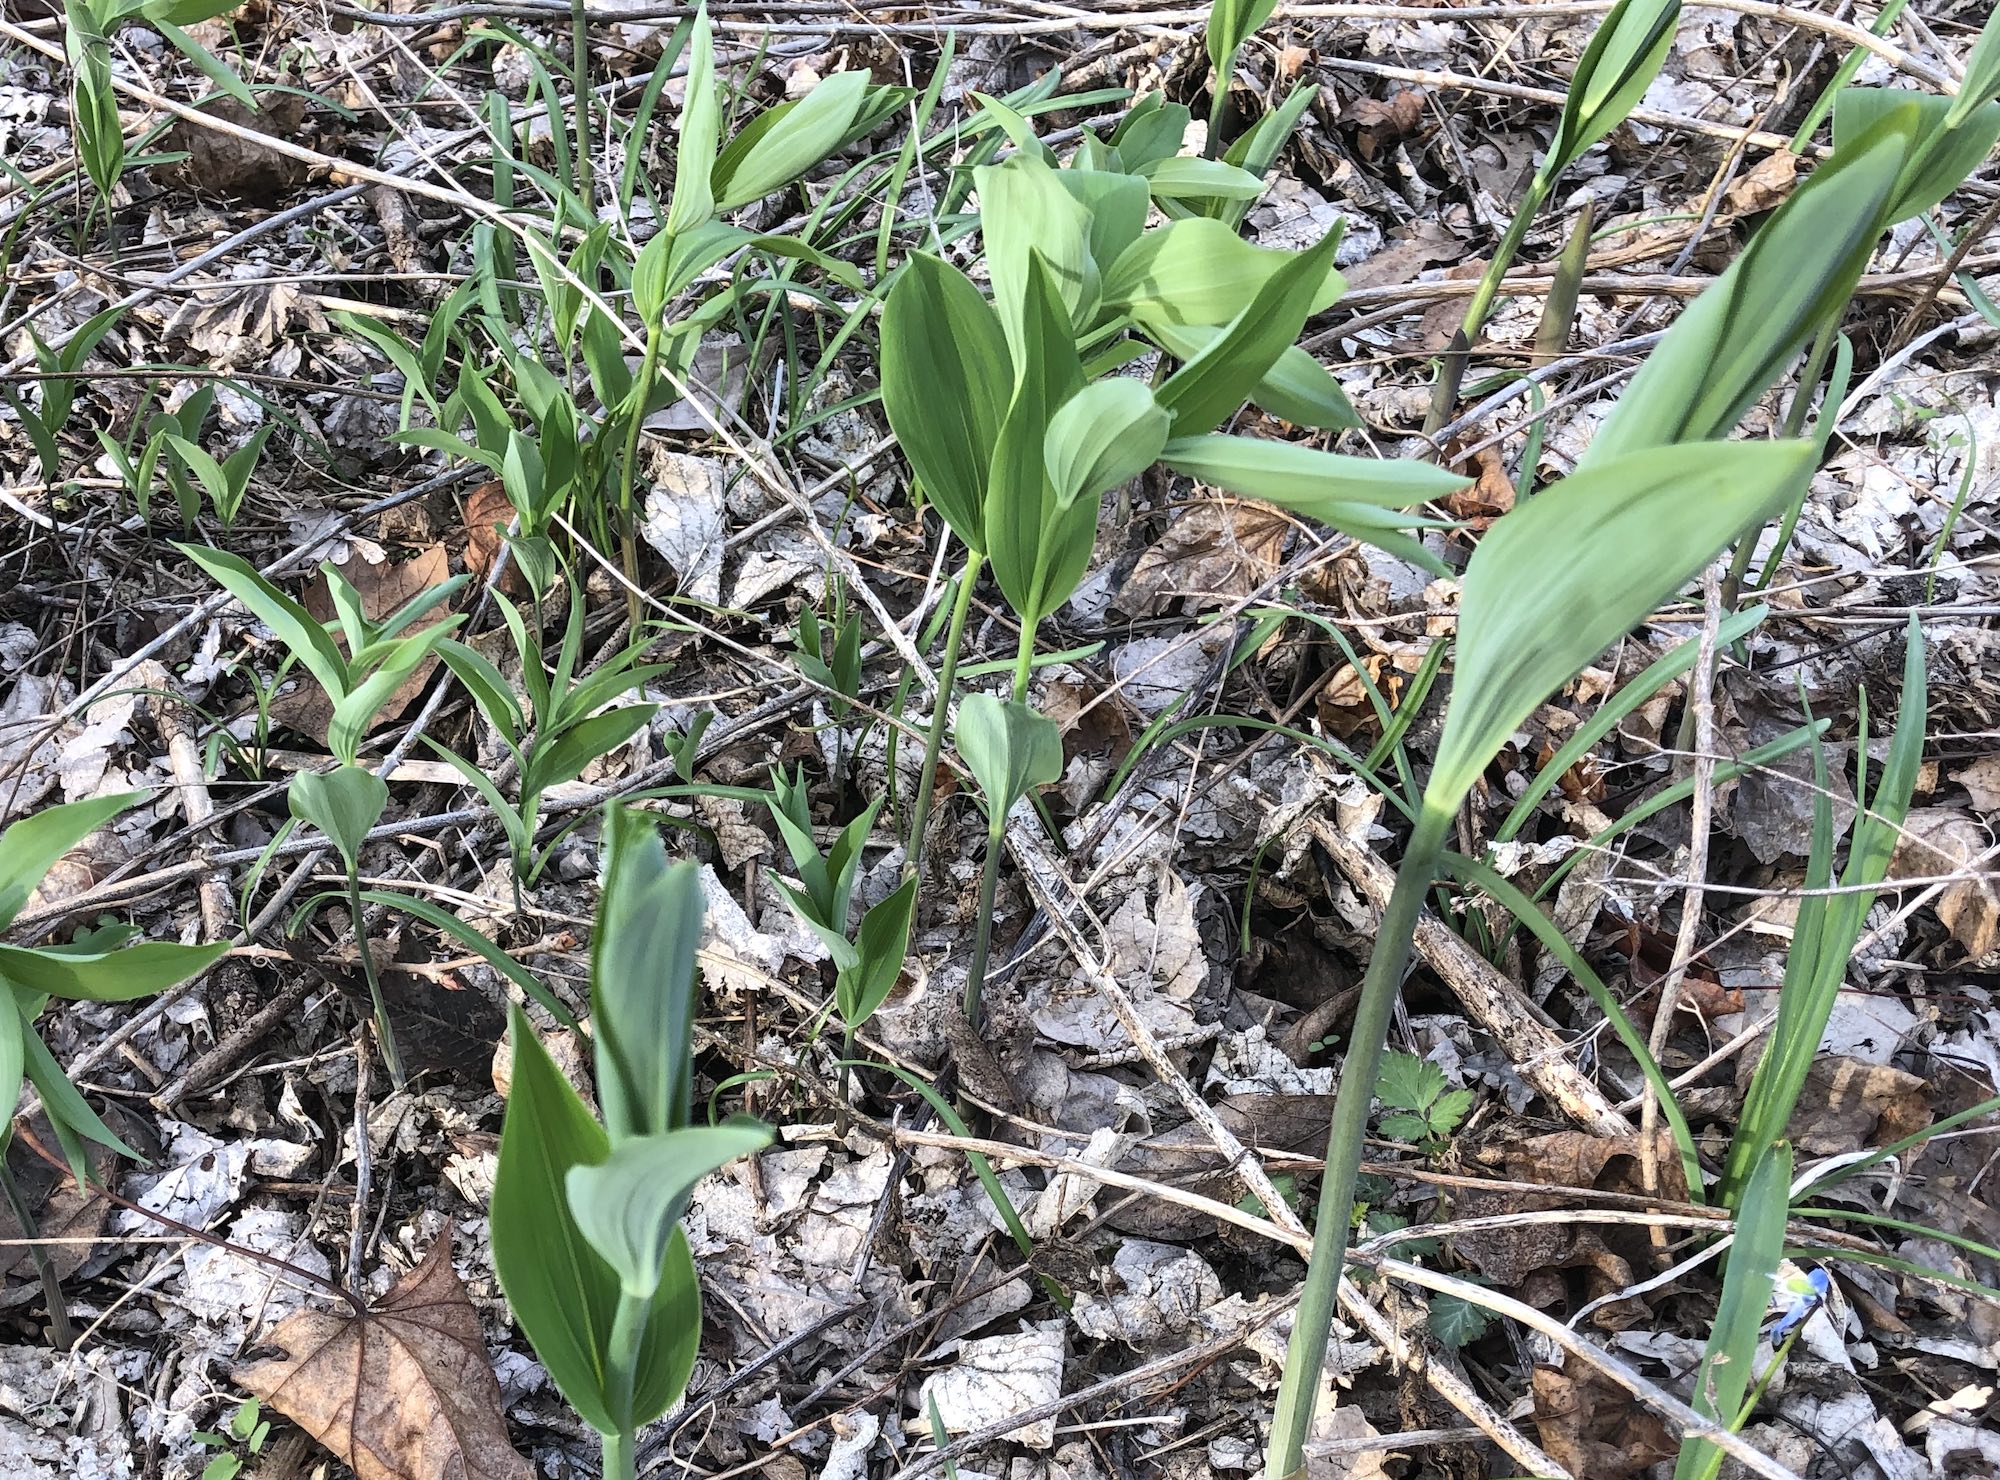 Solomon's Seal in yard off of Nakoma Road in Madison, Wisconsin on May 22, 2019.